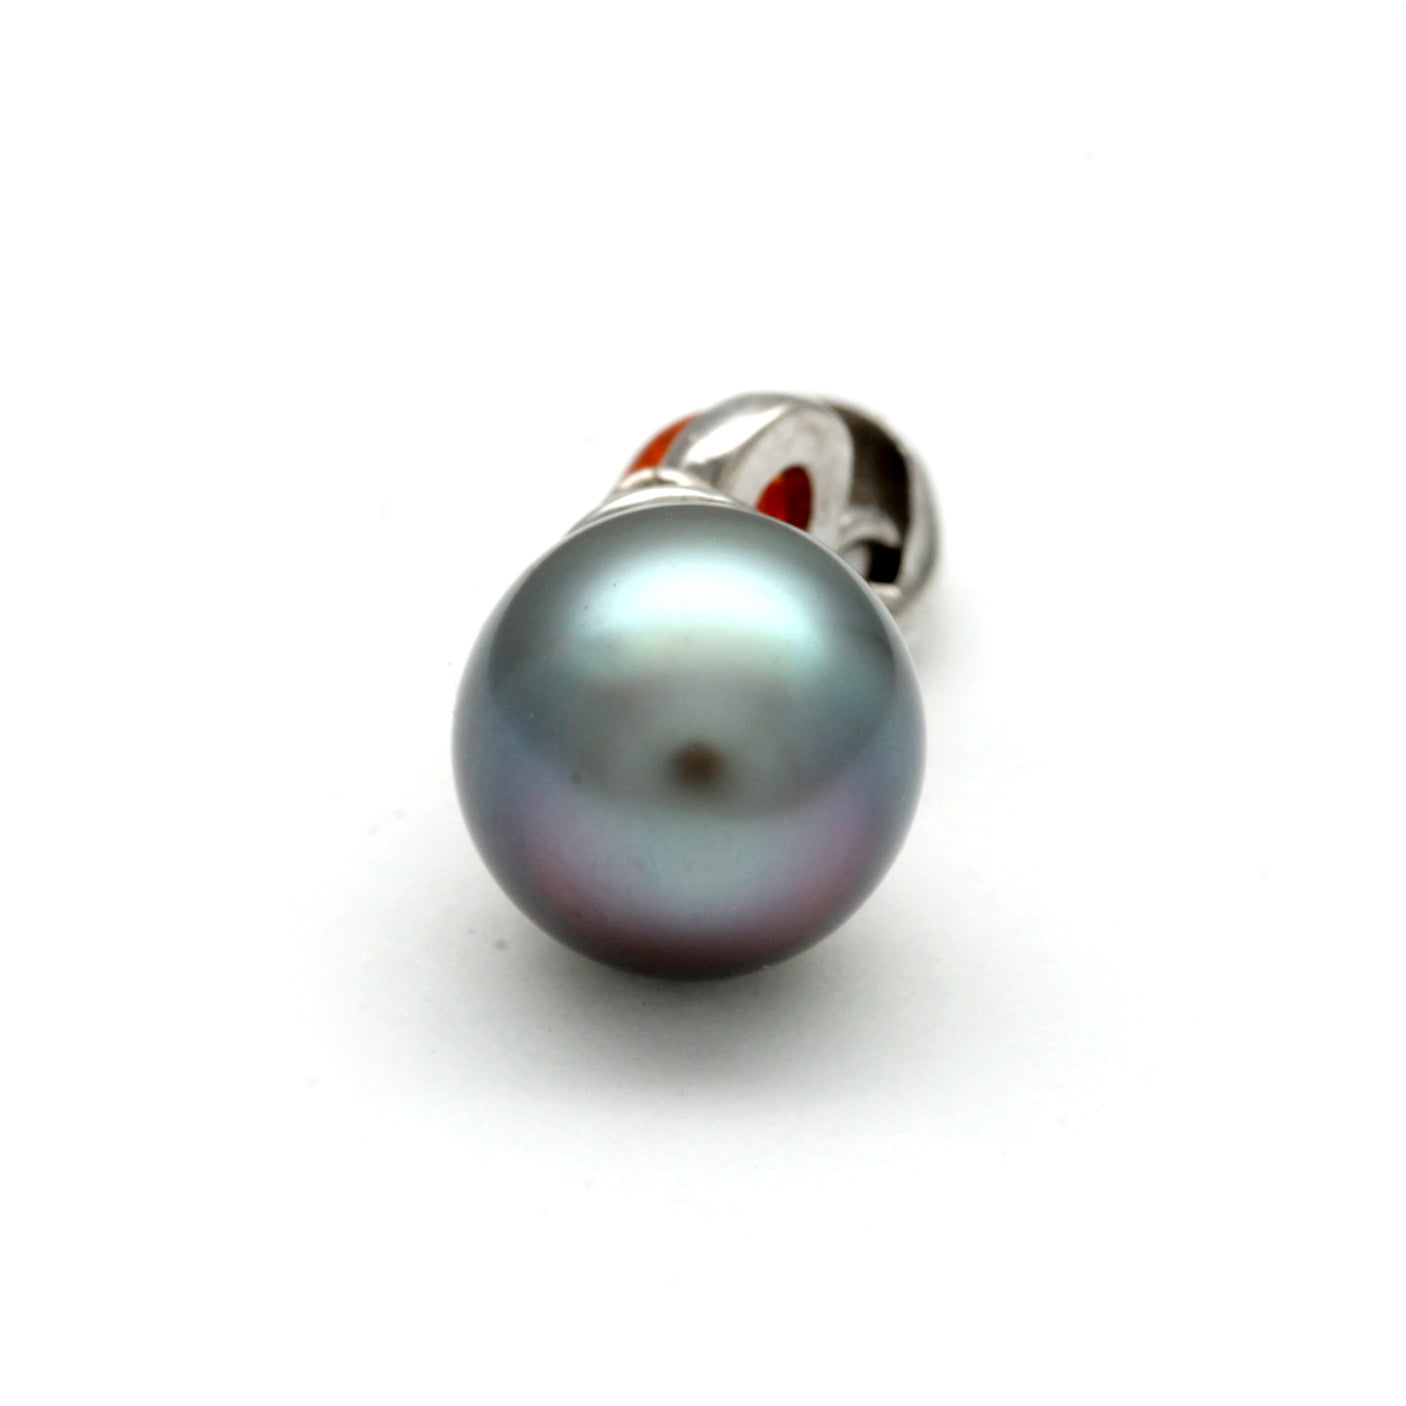 Blue/Green Cortez Pearl and Orange Fire Opal set on 14K White Gold Pendant